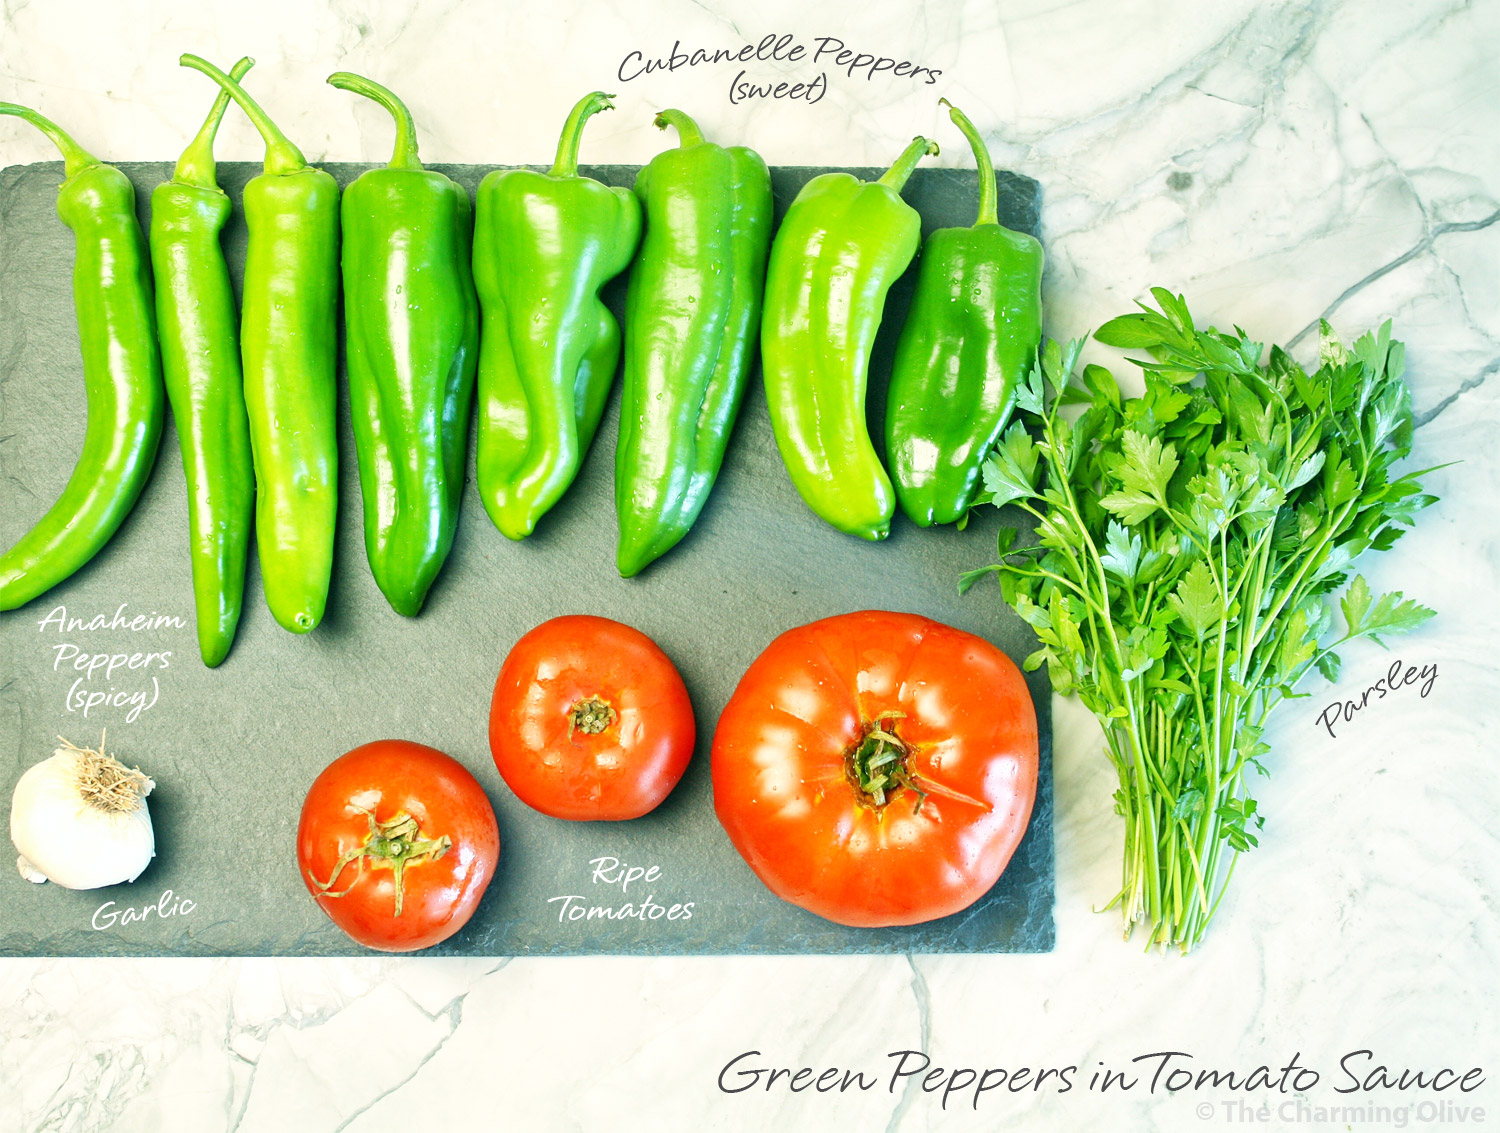 Green Peppers in Tomato Sauce Recipe